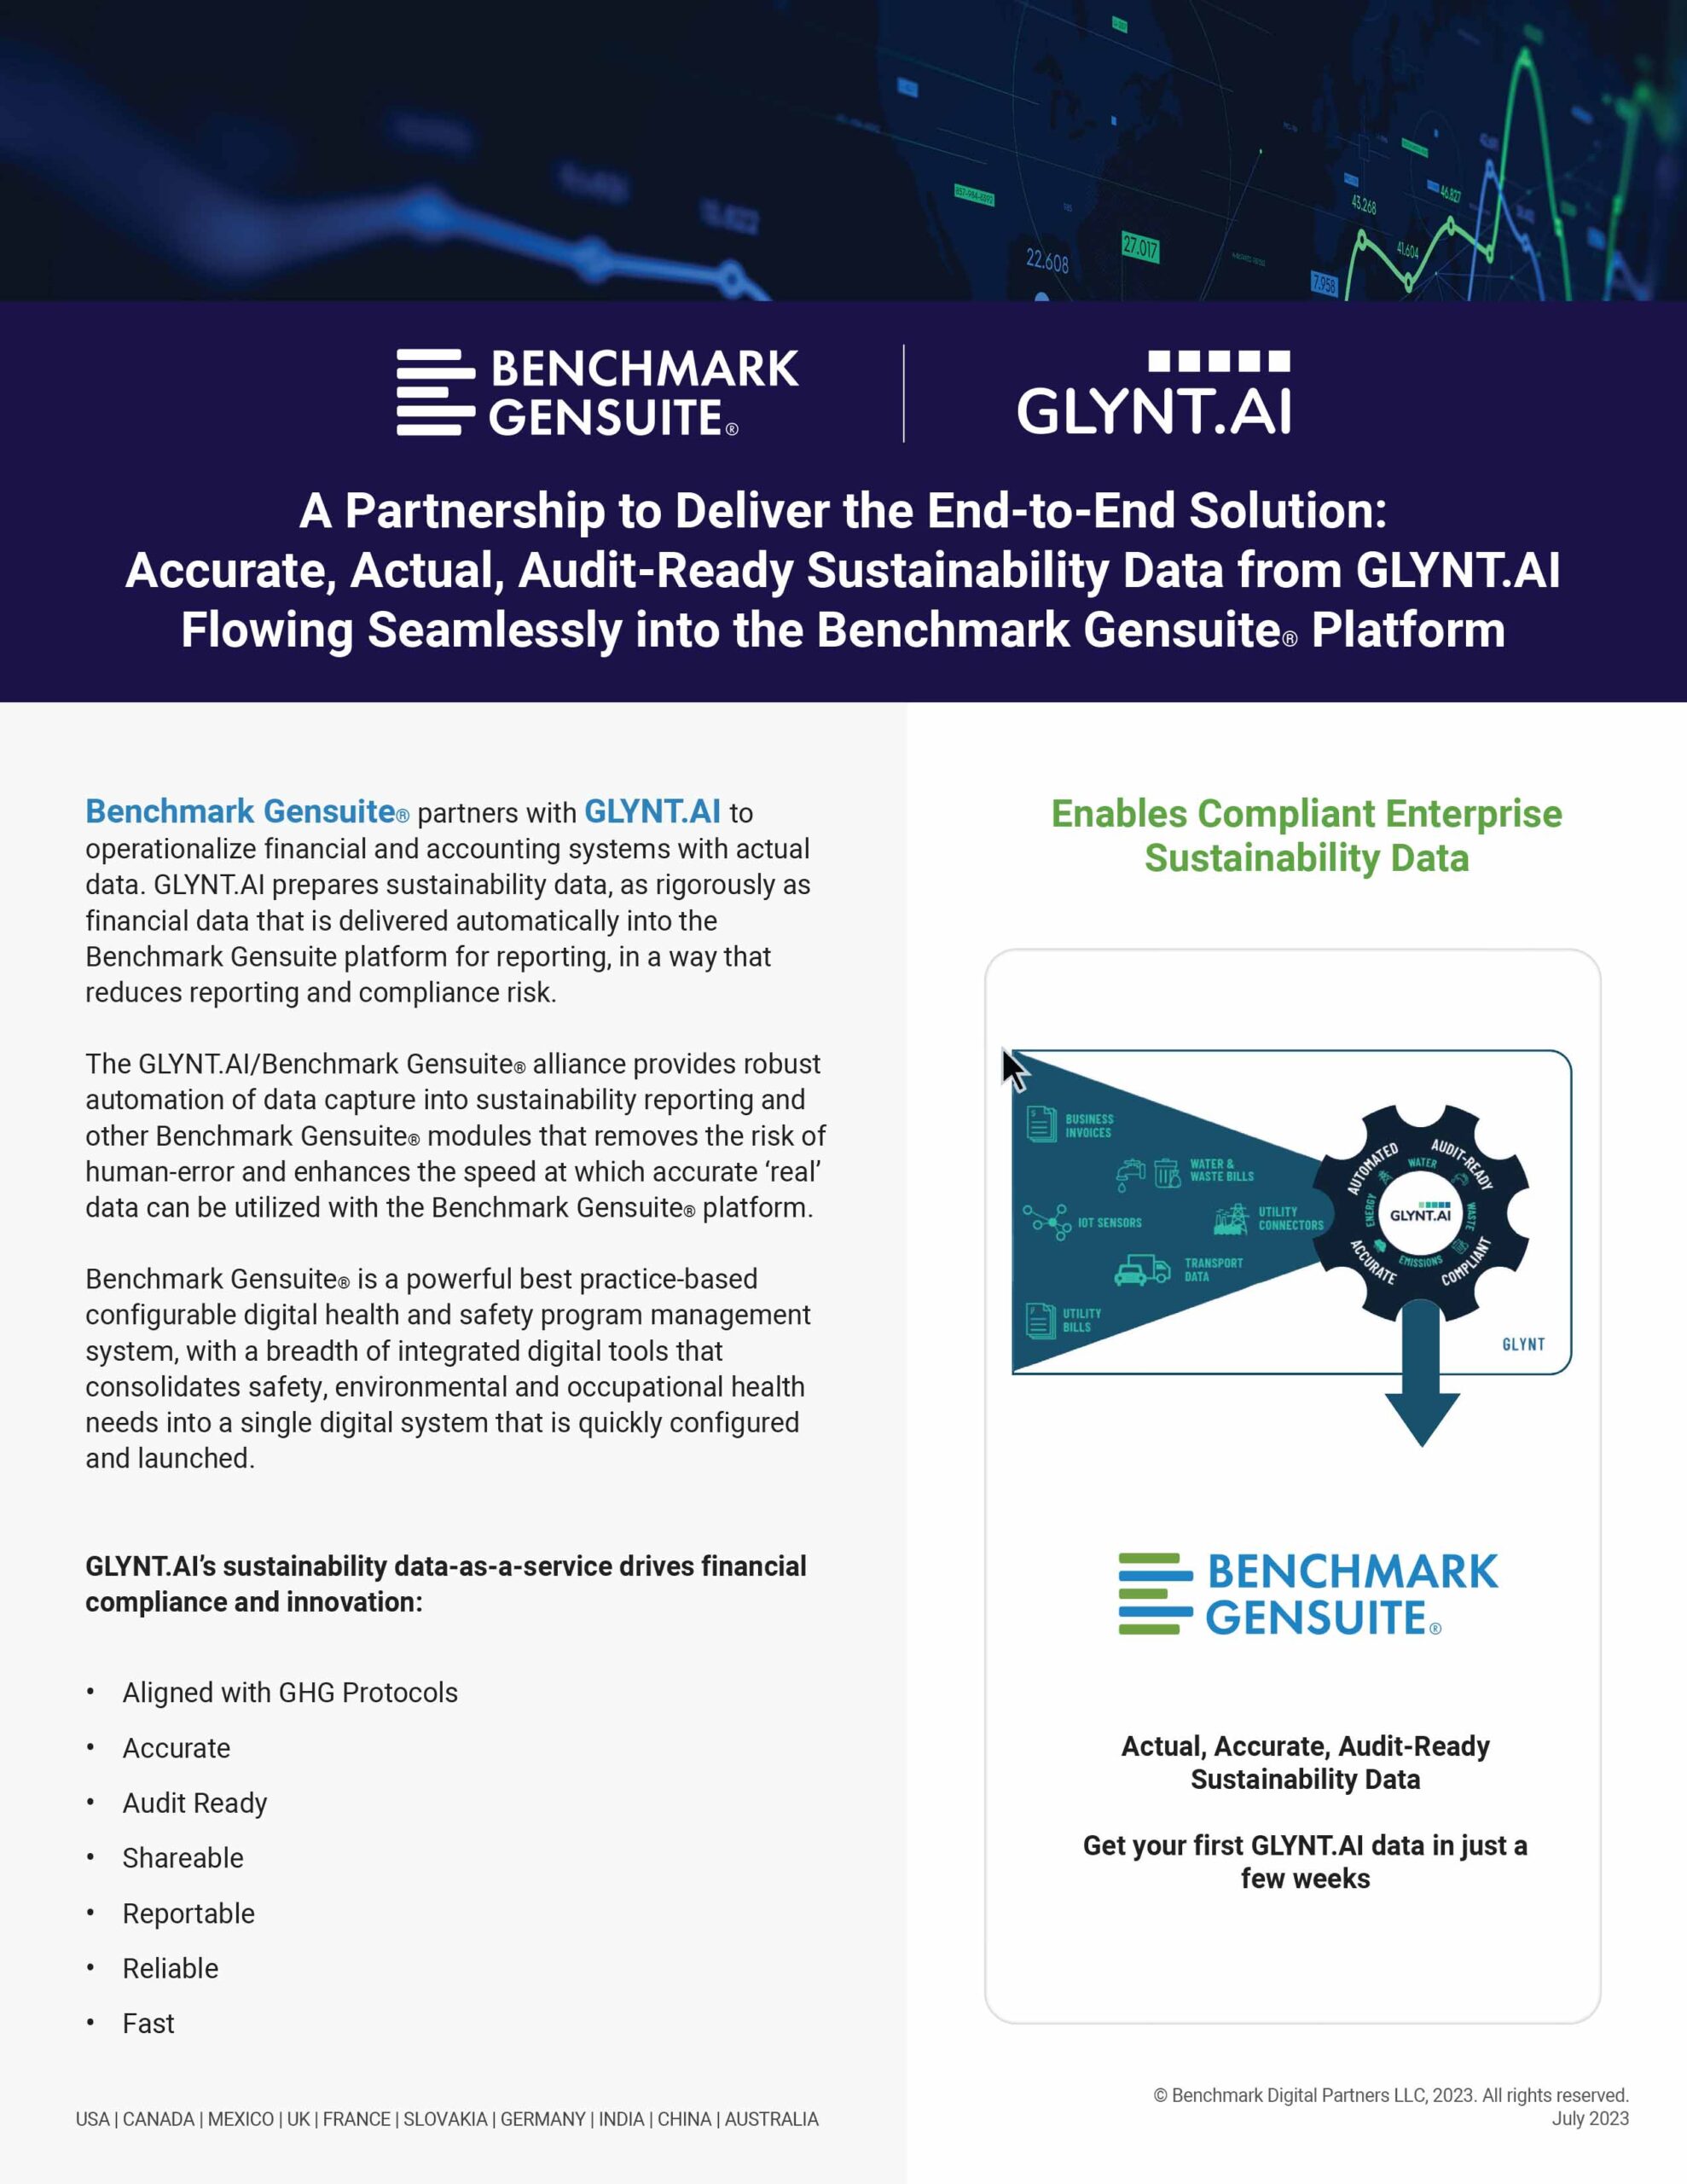 The Benchmark Gensuite and GLYNT.AI Partnership